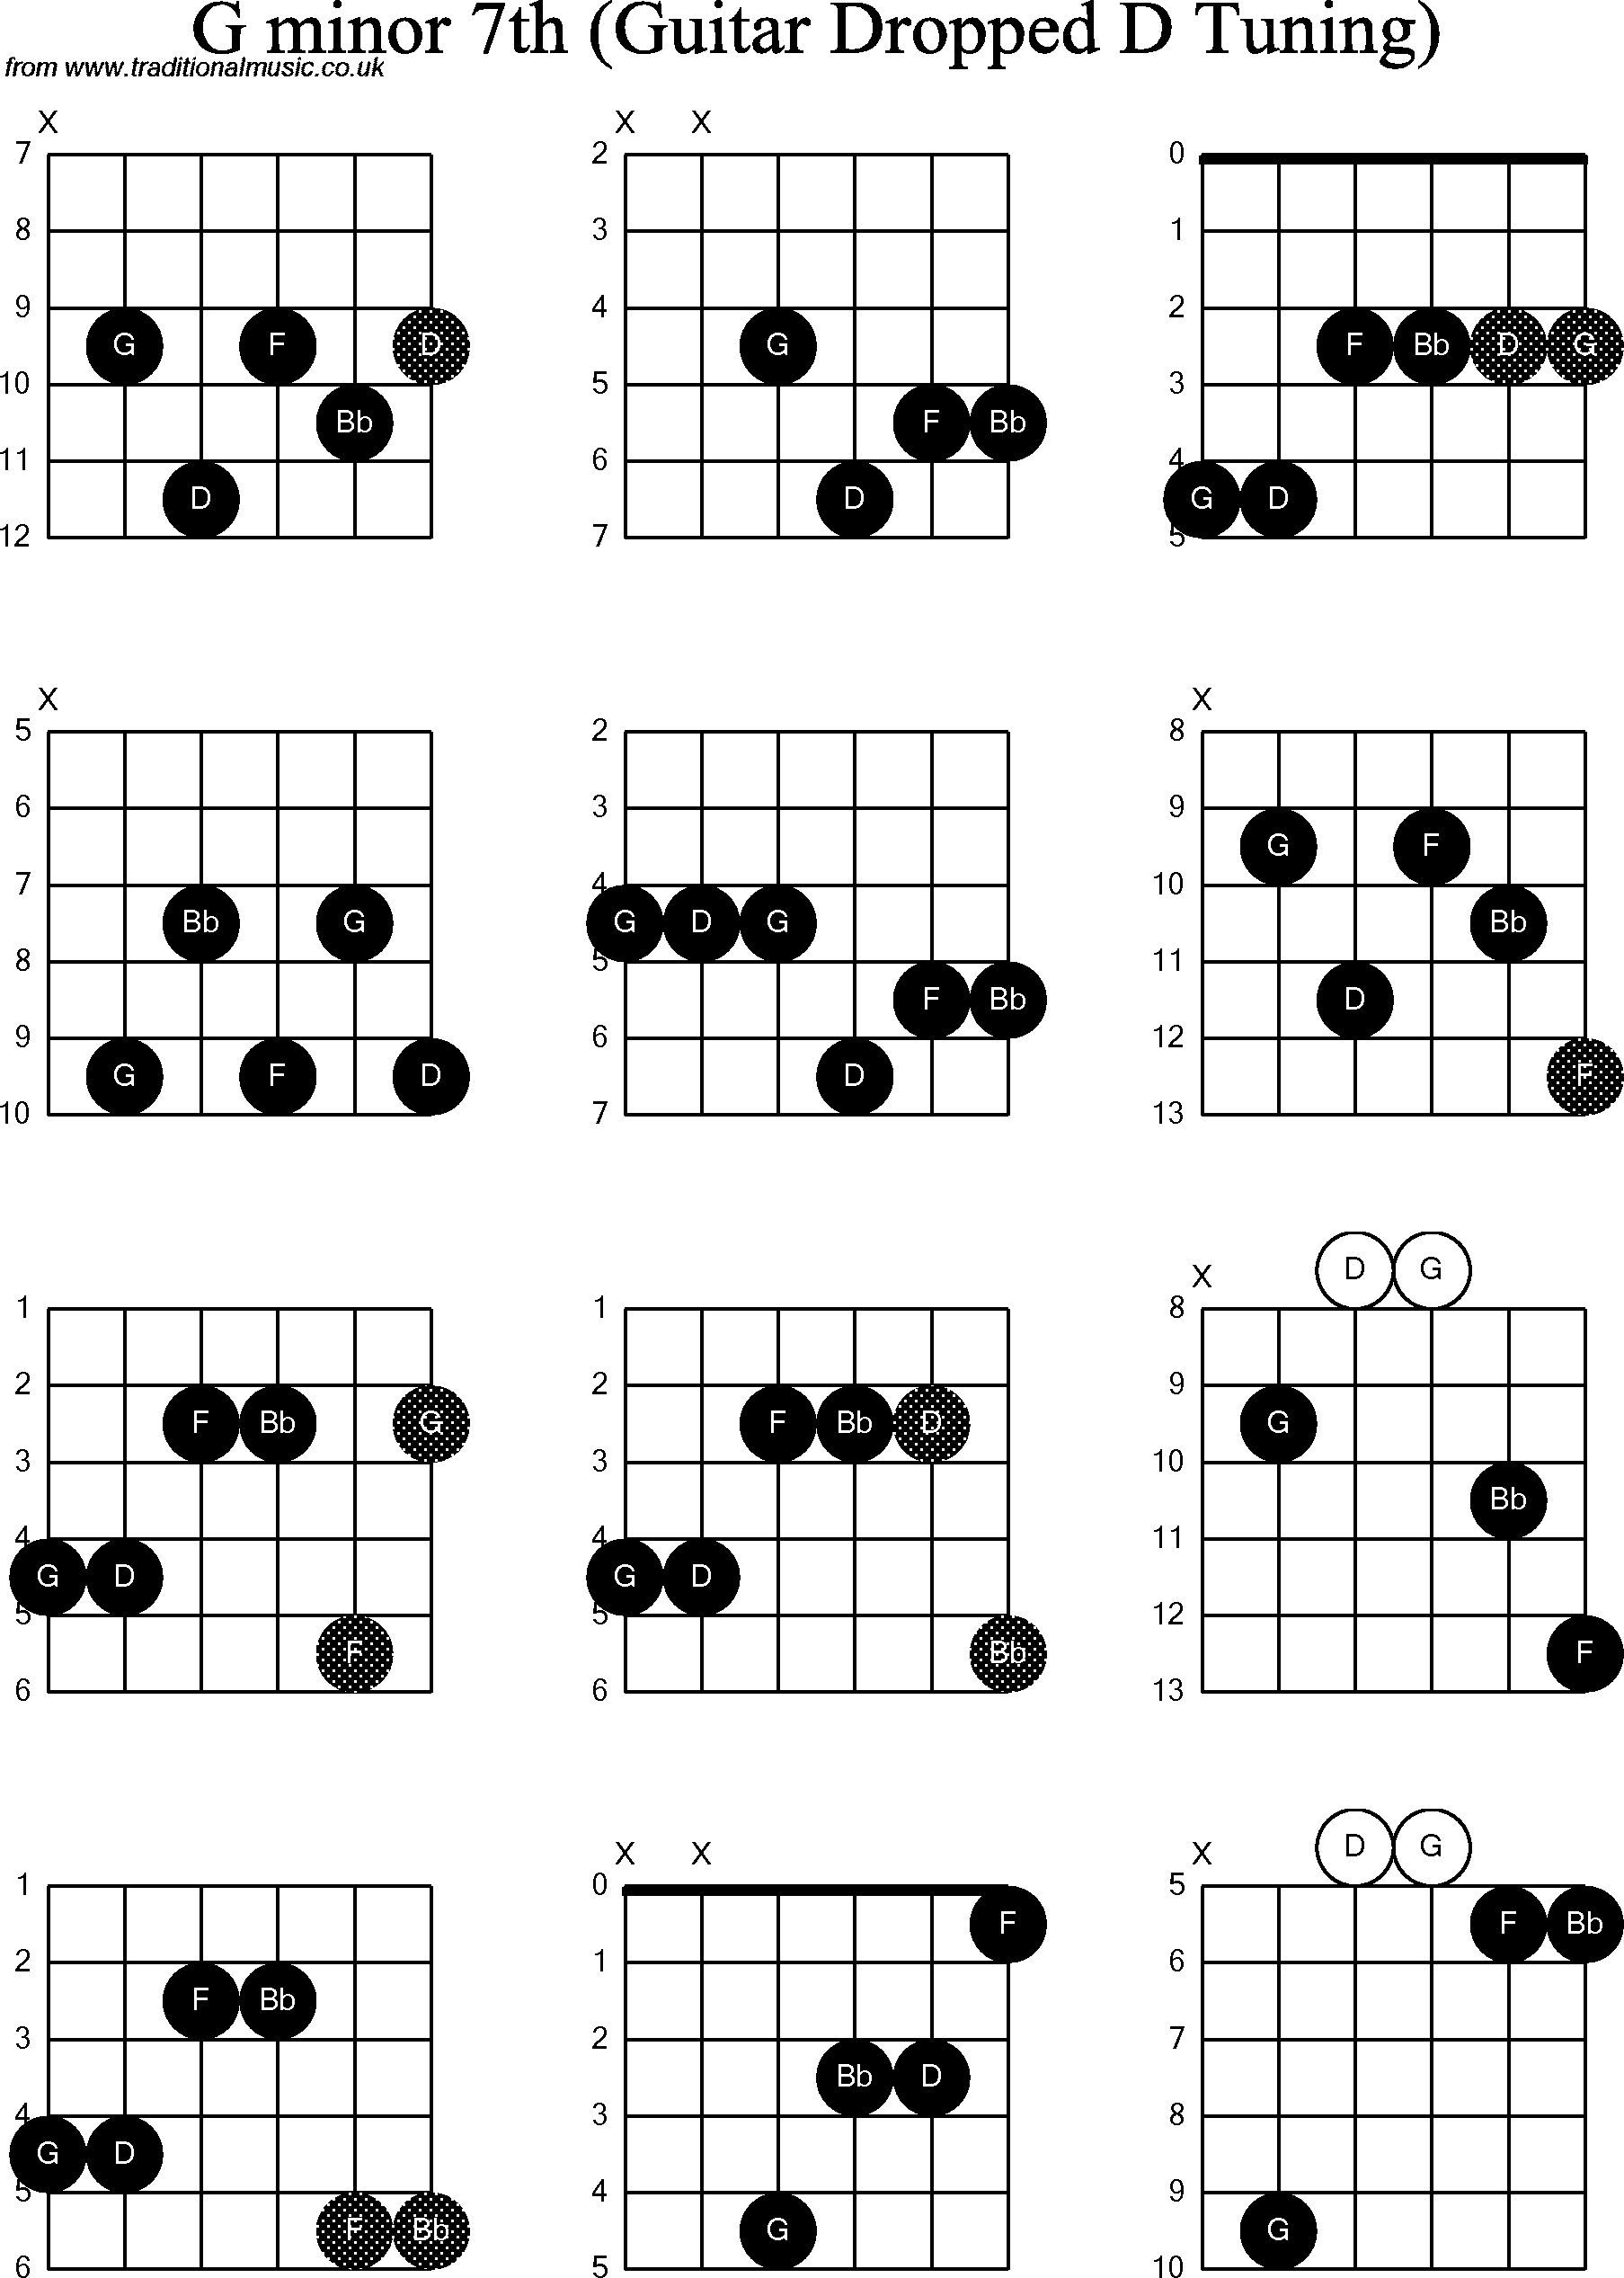 Chord diagrams for dropped D Guitar(DADGBE), G Minor7th